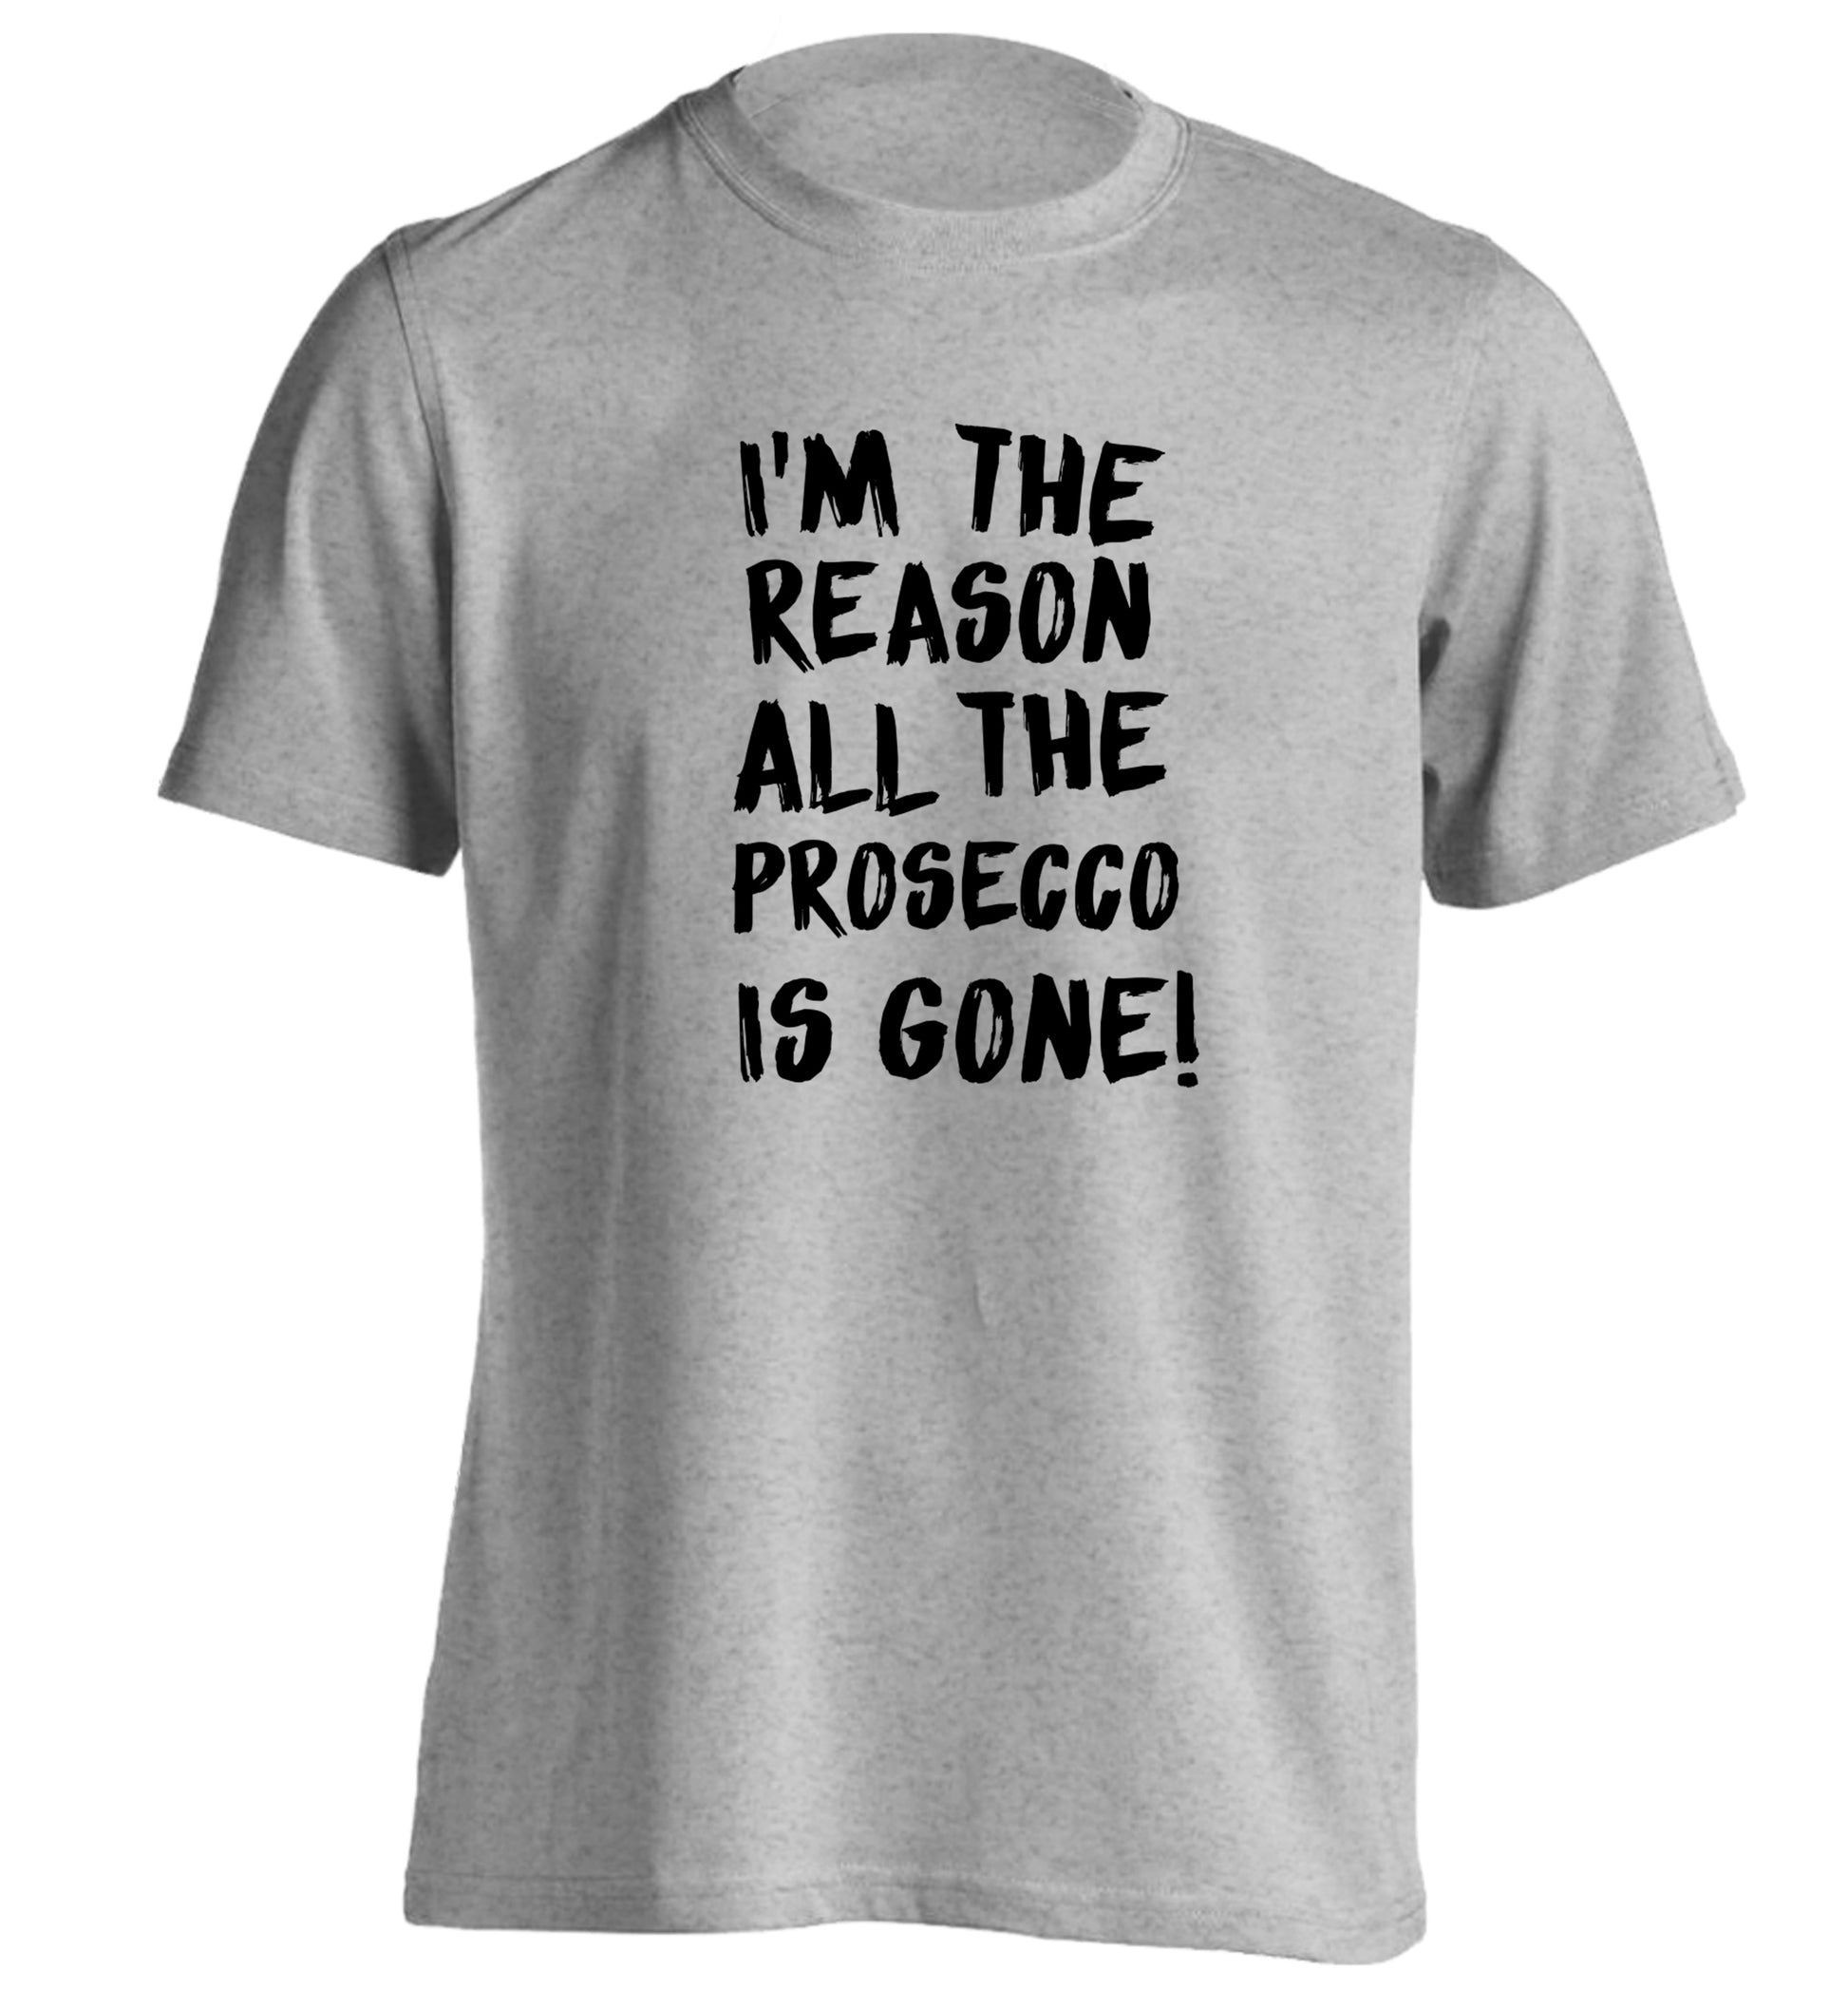 I'm the reason all the prosecco is gone adults unisex grey Tshirt 2XL